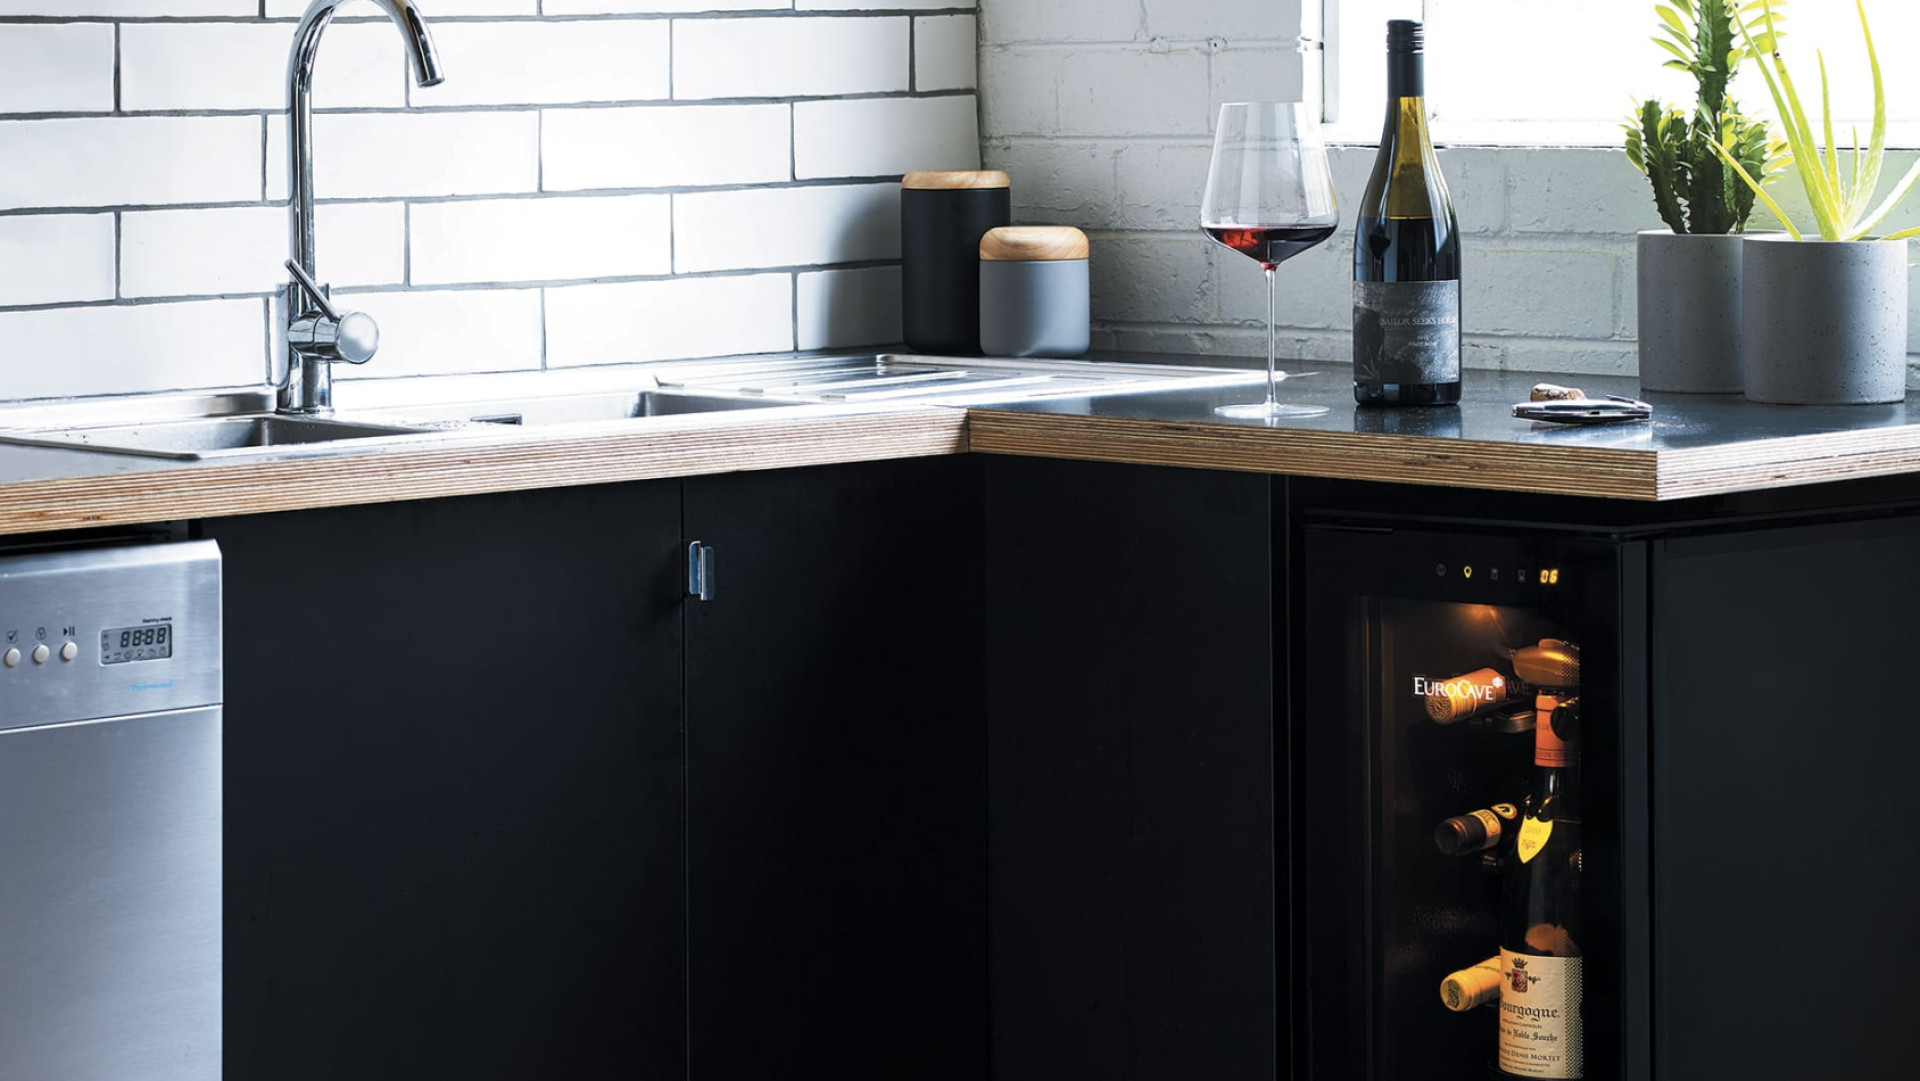 The sweet pleasure of enjoying a food and wine pairing for two thanks to this home wine bar station and its ideal wine tasting temperature.